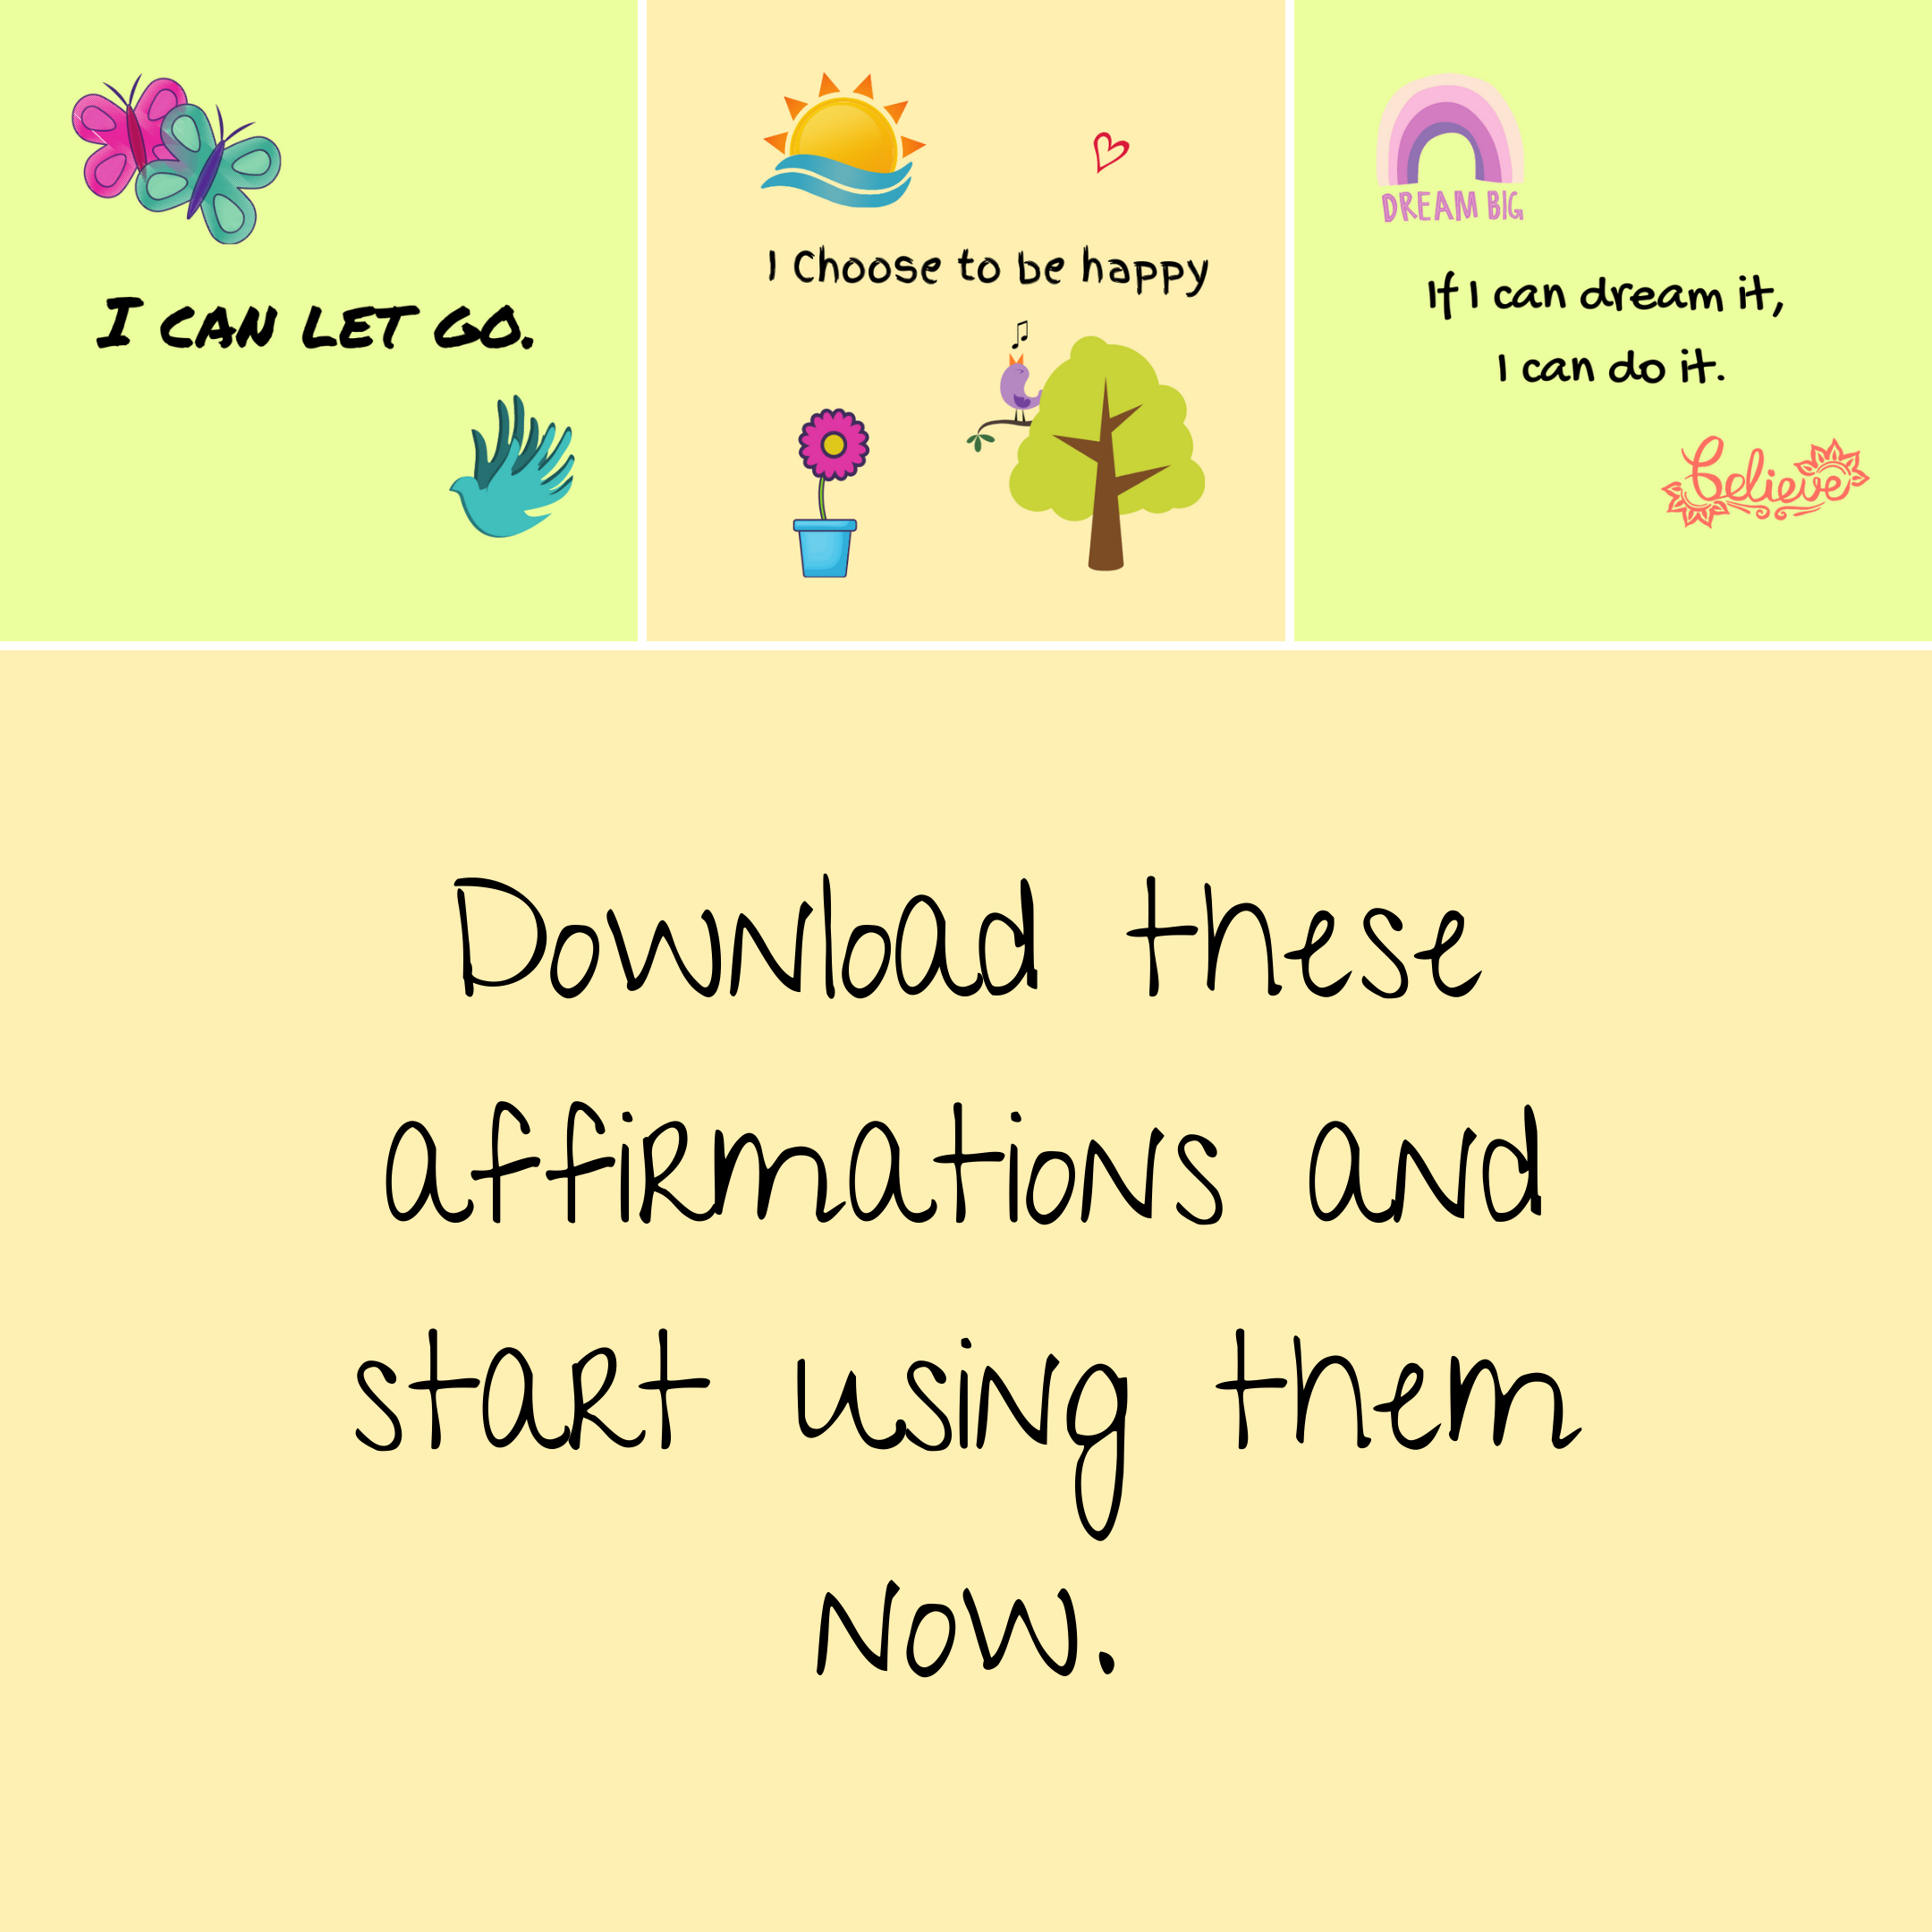 Printable Positive Affirmation Cards For Teens